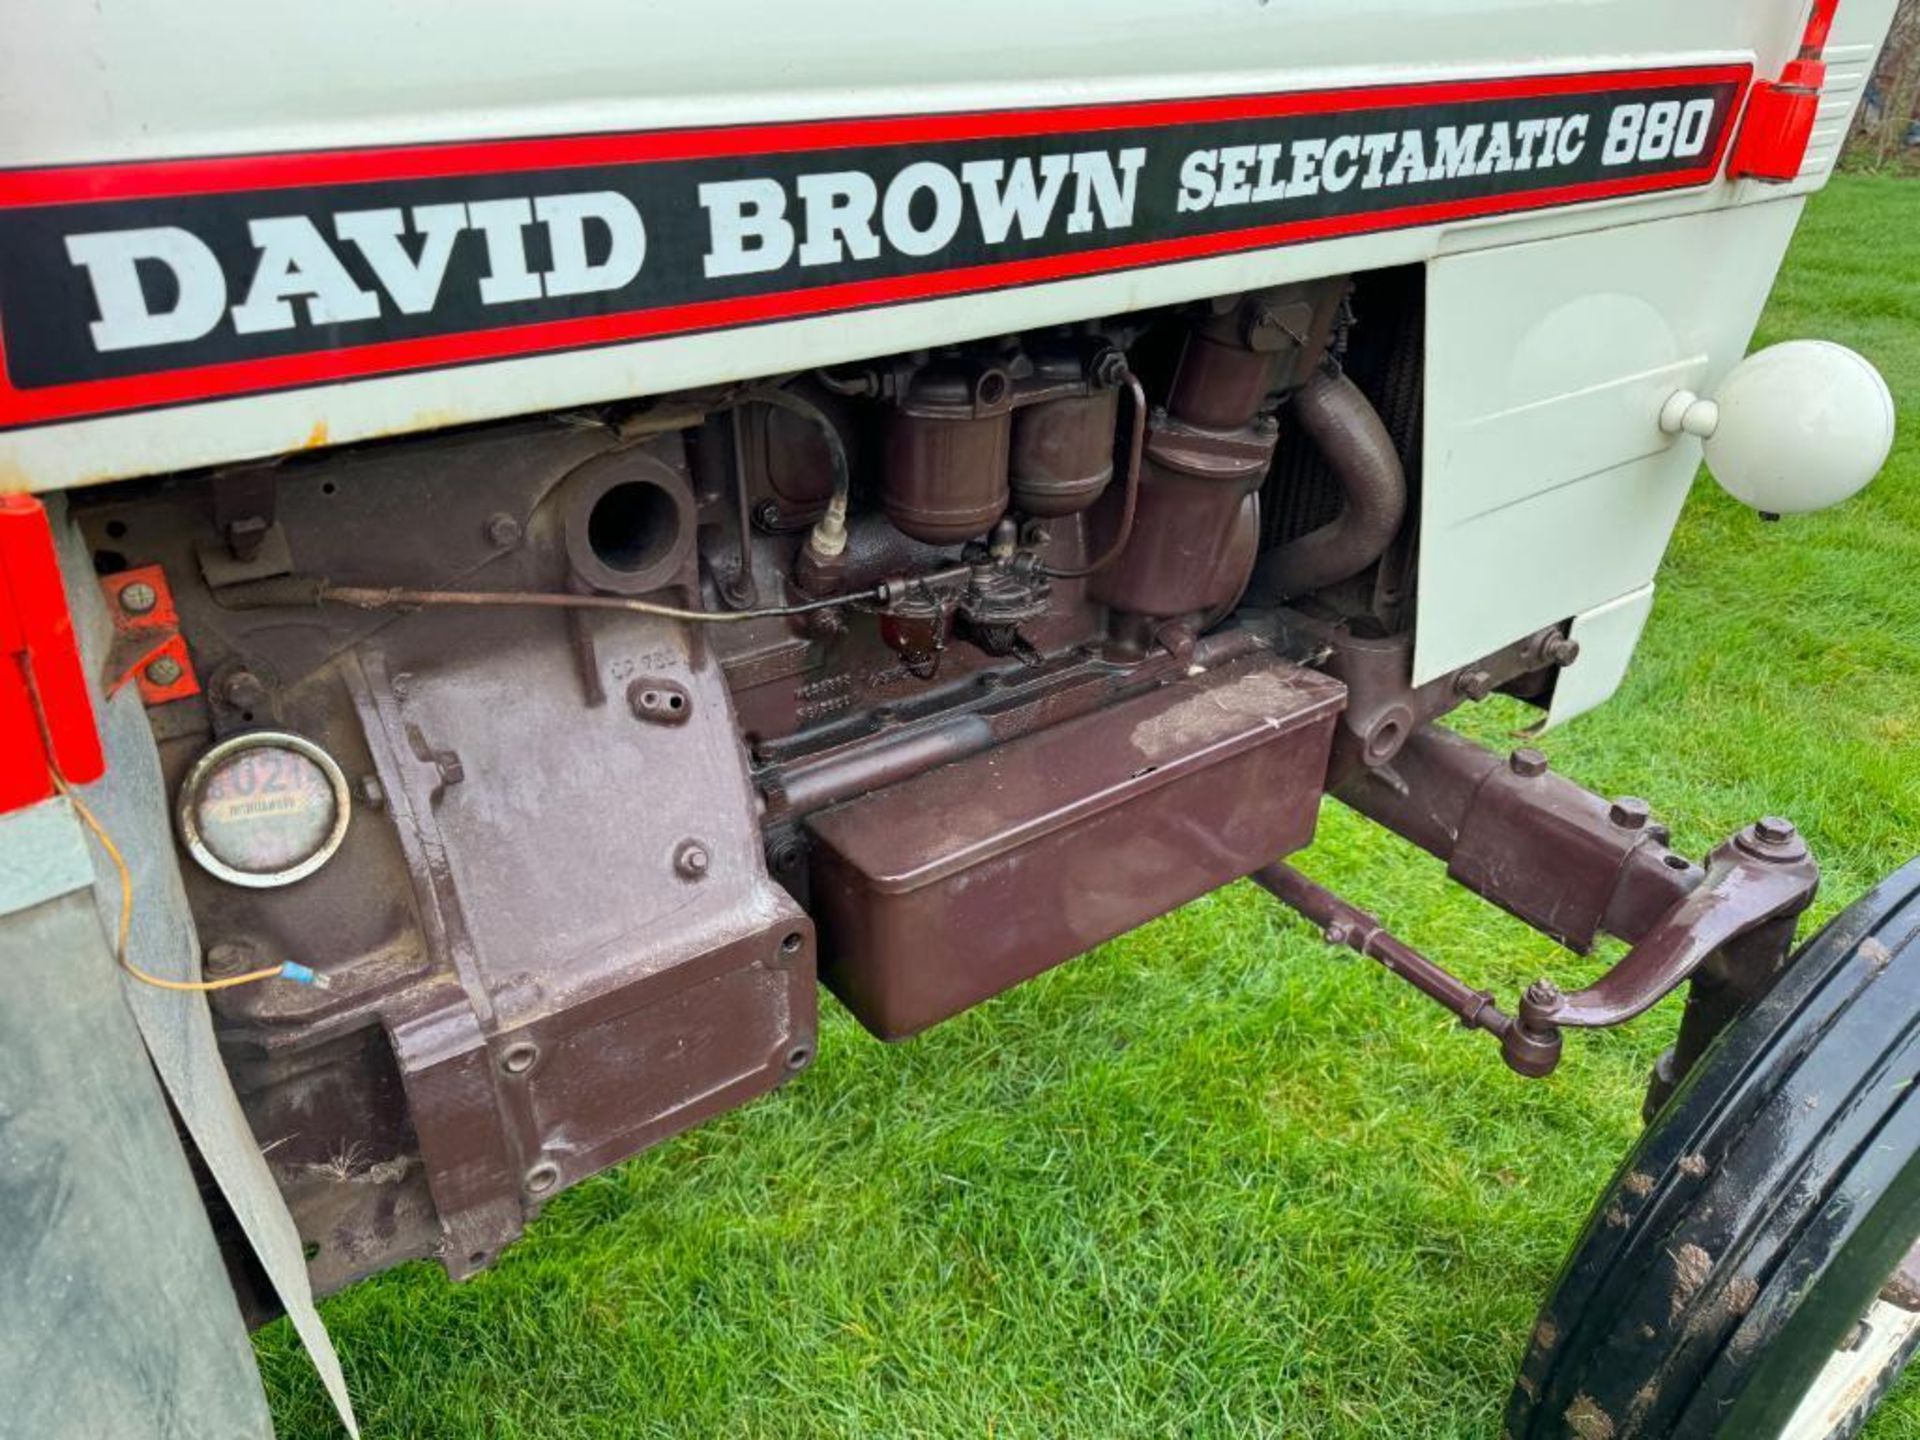 1968 David Brown 880 Selectamatic 2wd diesel tractor with canvas cab, rear hydraulic valve, PTO, rea - Image 11 of 19